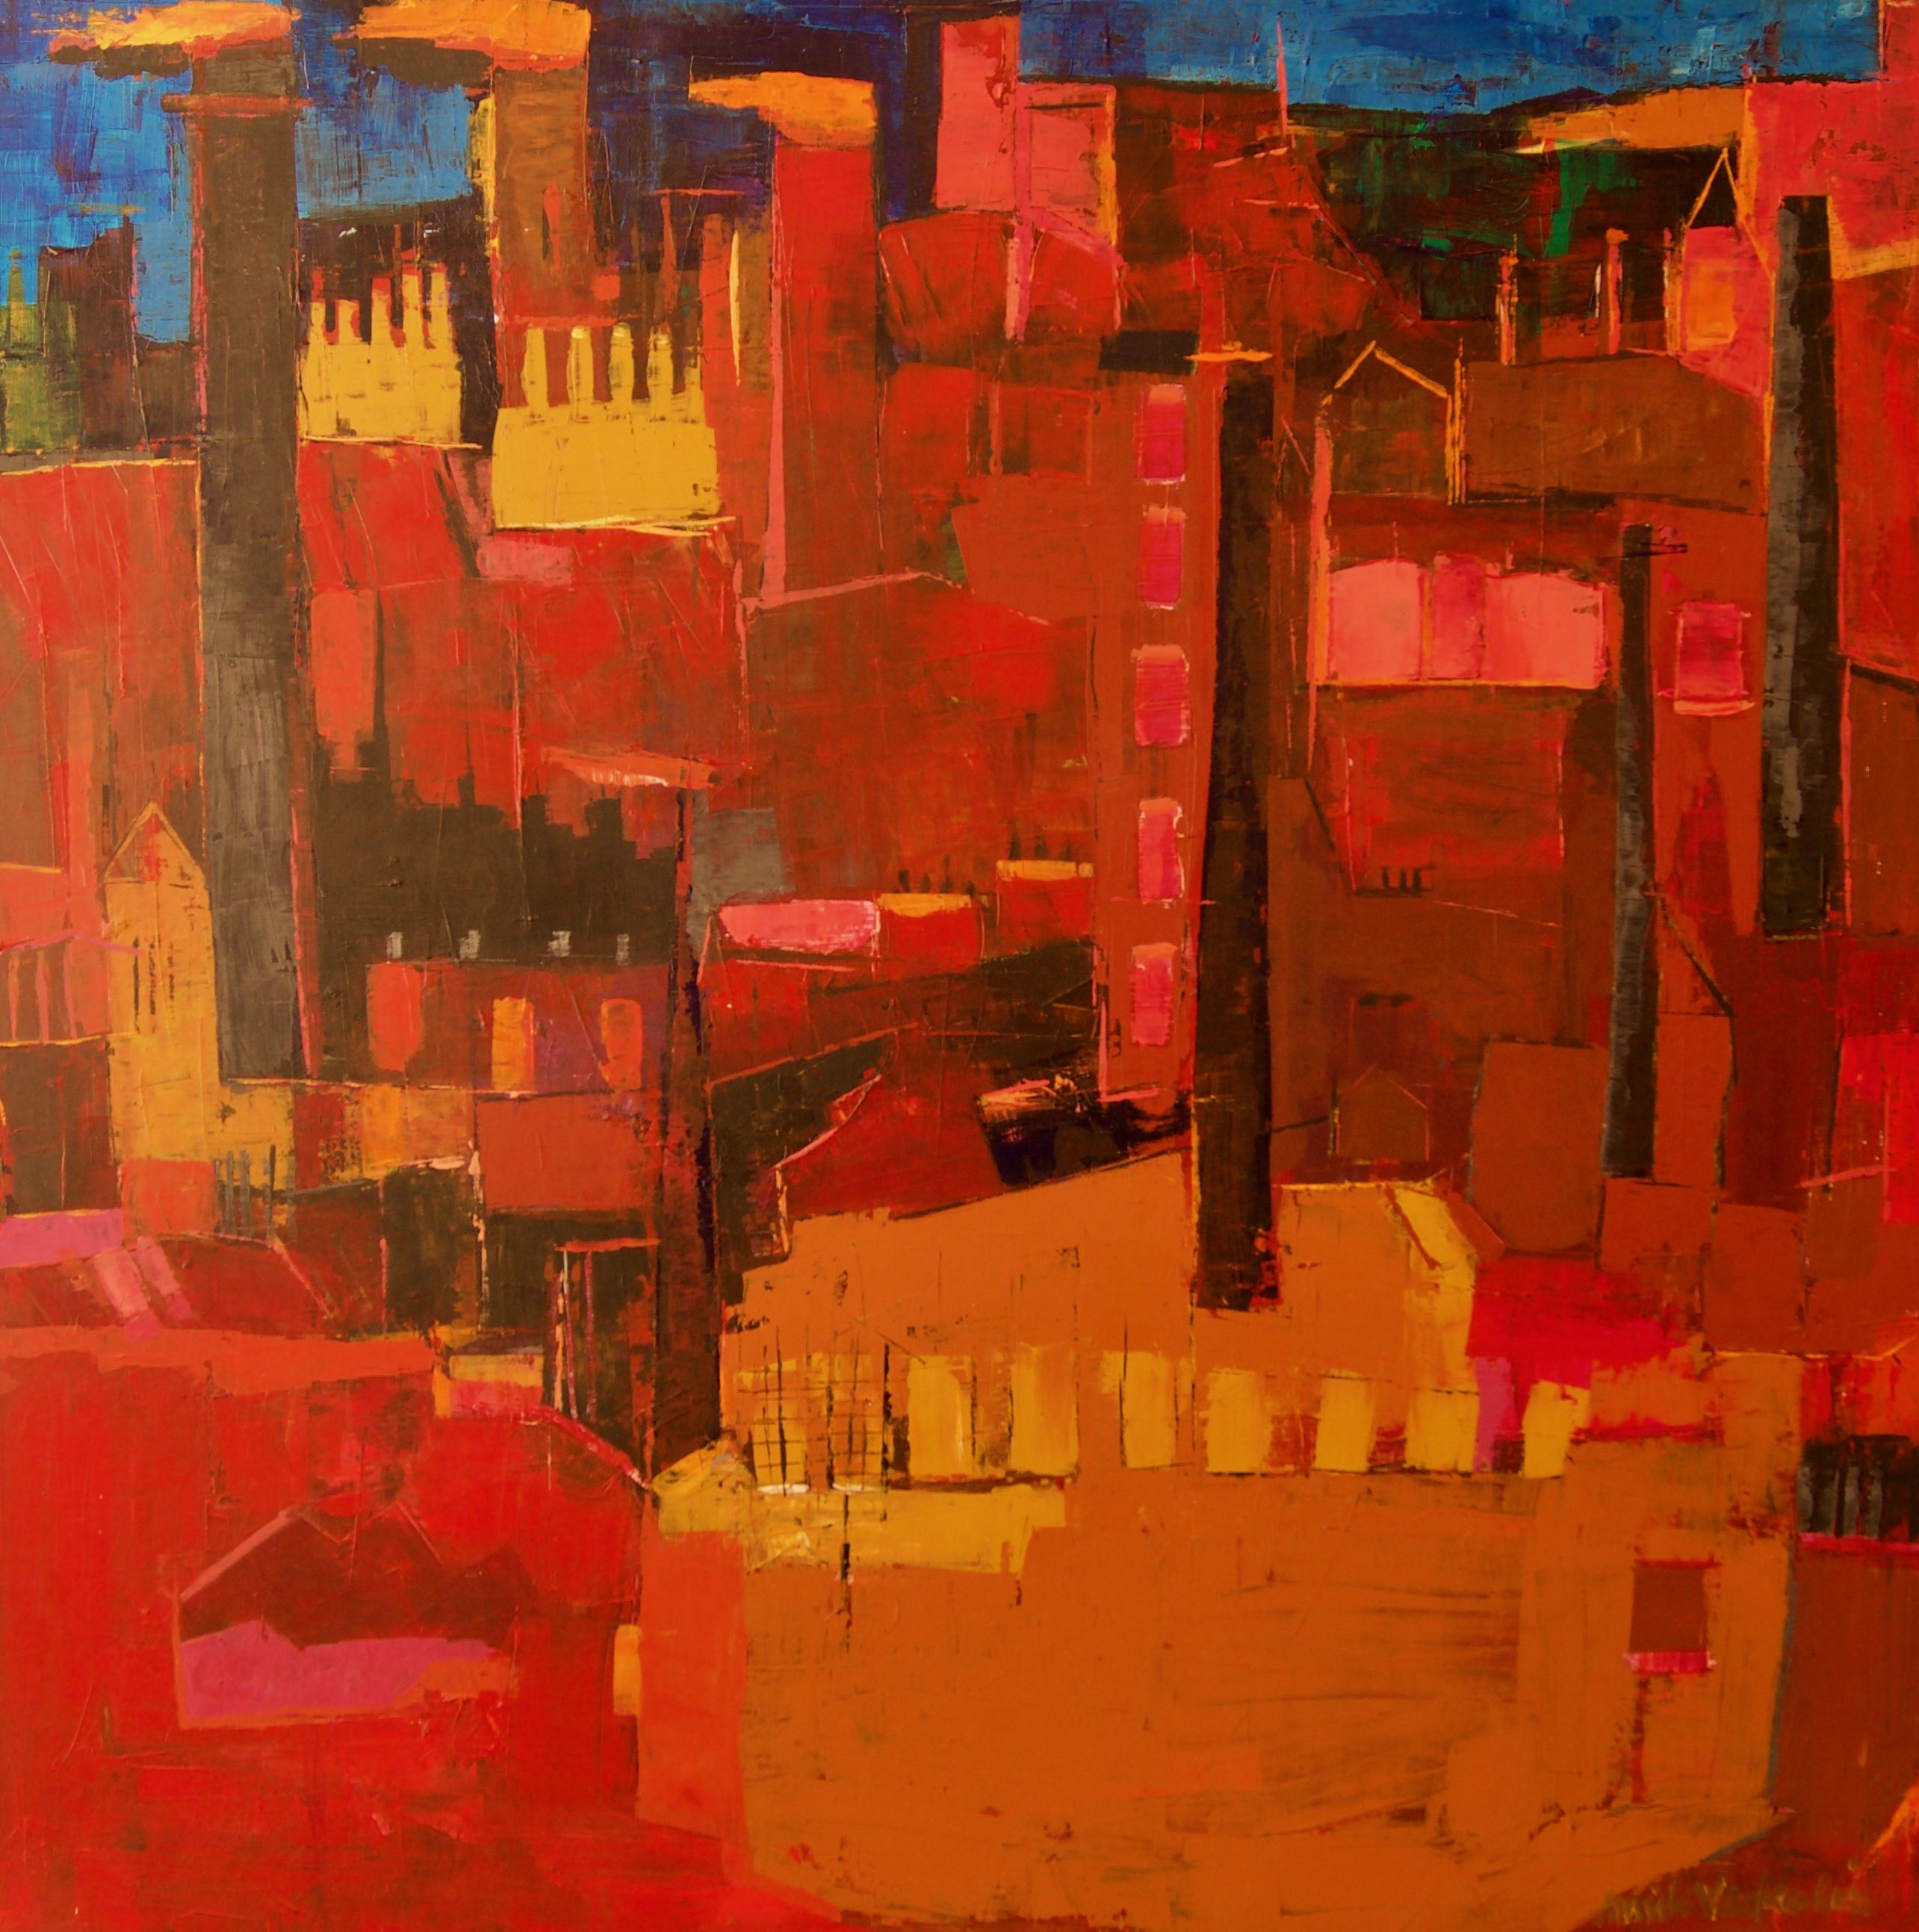 abstract city landscape paintings